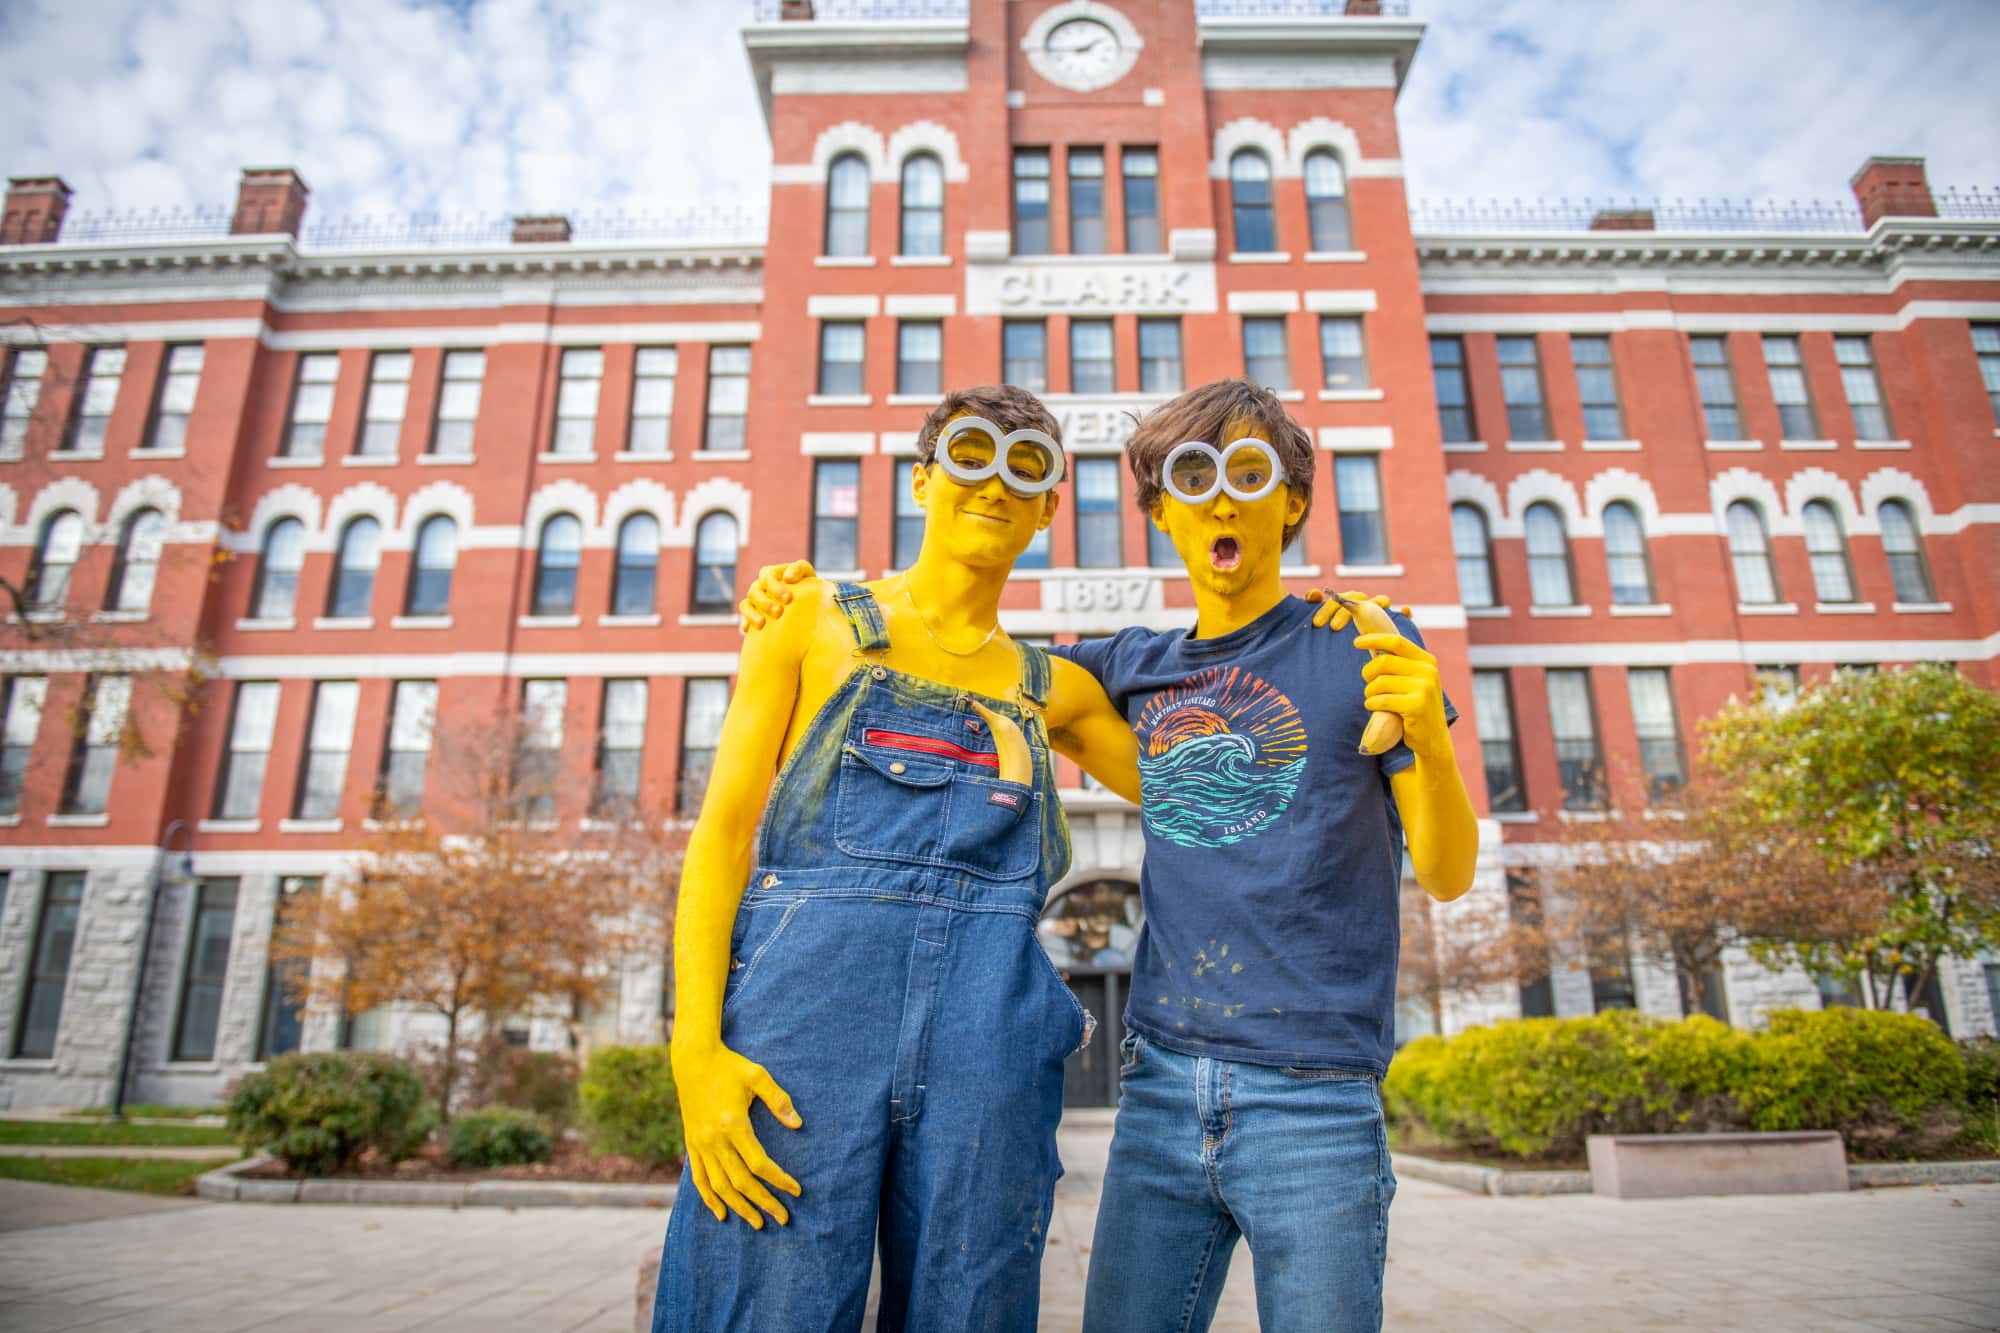 students dressed as Minions for Halloweekend